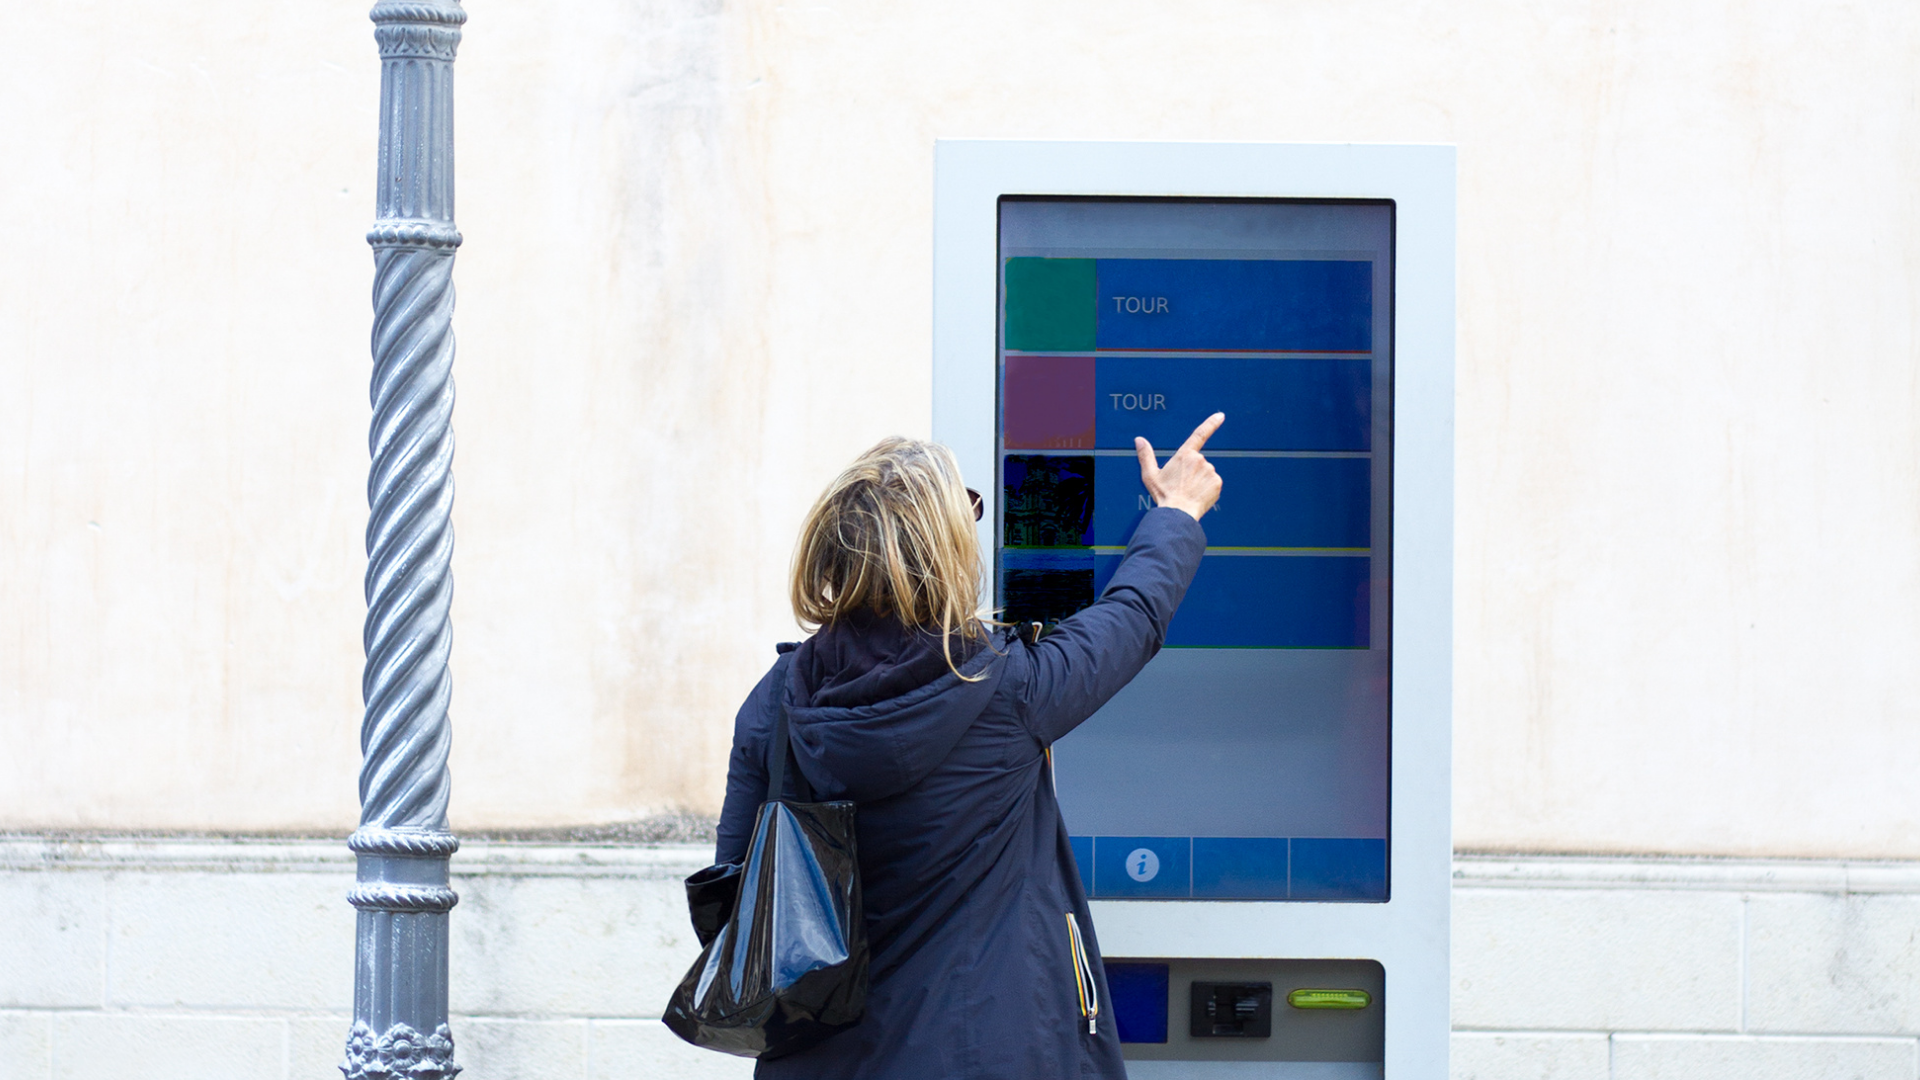 A woman dressed in a black jacket interacts with a touchscreen outdoor digital signage kiosk installed on the sidewalk of a building. The digital signage screen shows four clickable options.